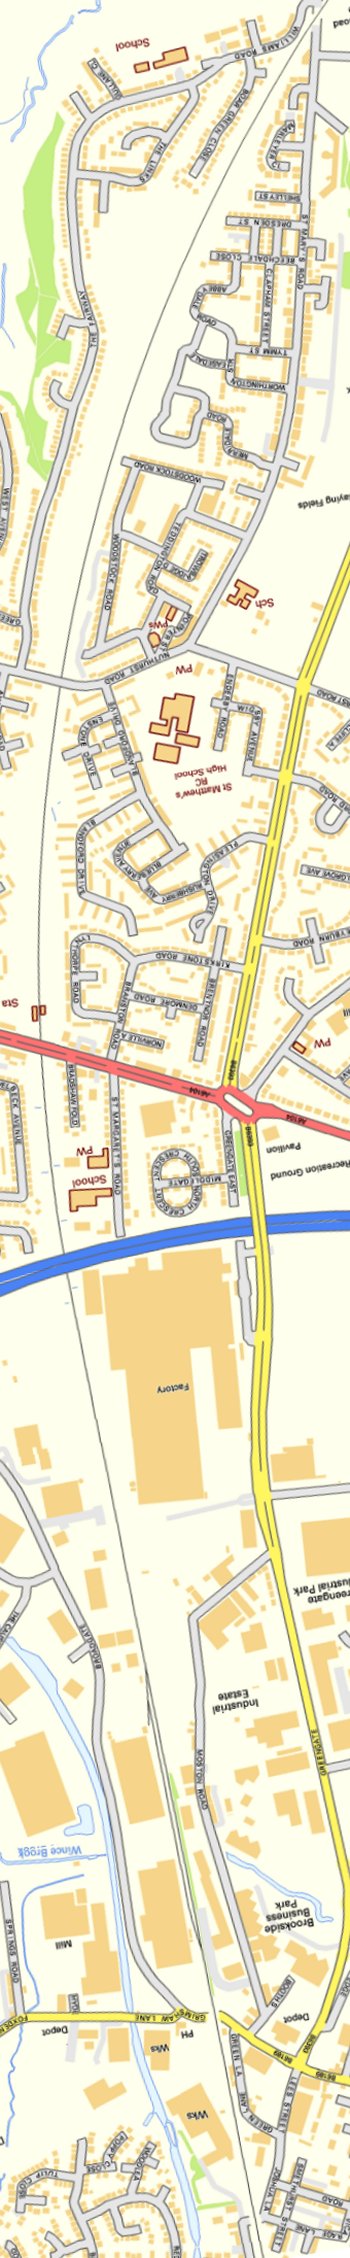 Section from Ordnance Survey OpenSource mapping 2013 showing L&YR railway line from Moston Station to Joshua Lane bridge